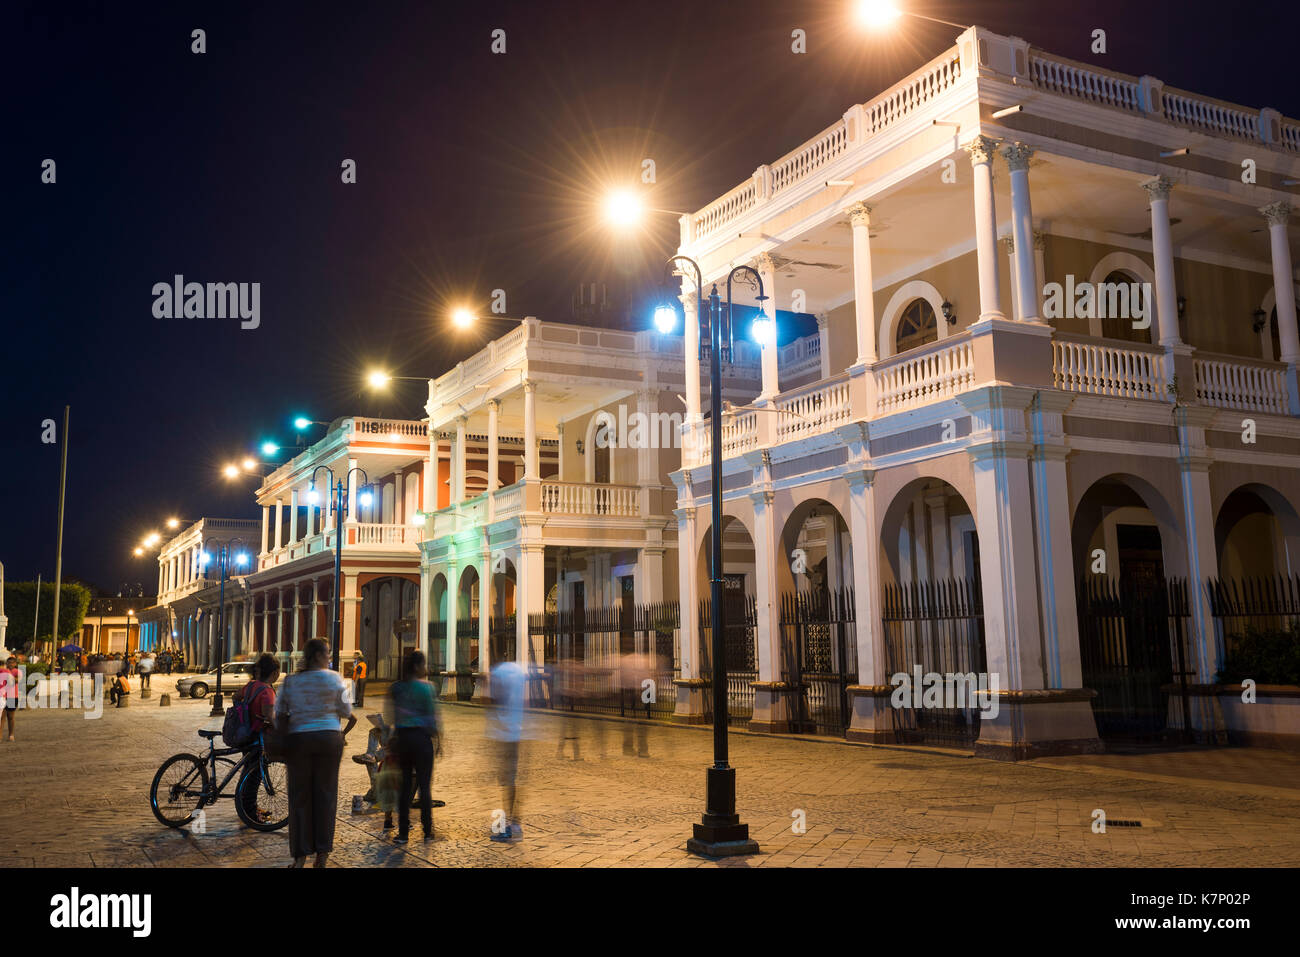 Evening at the main square Parque Central, old town of Granada, Nicaragua Stock Photo